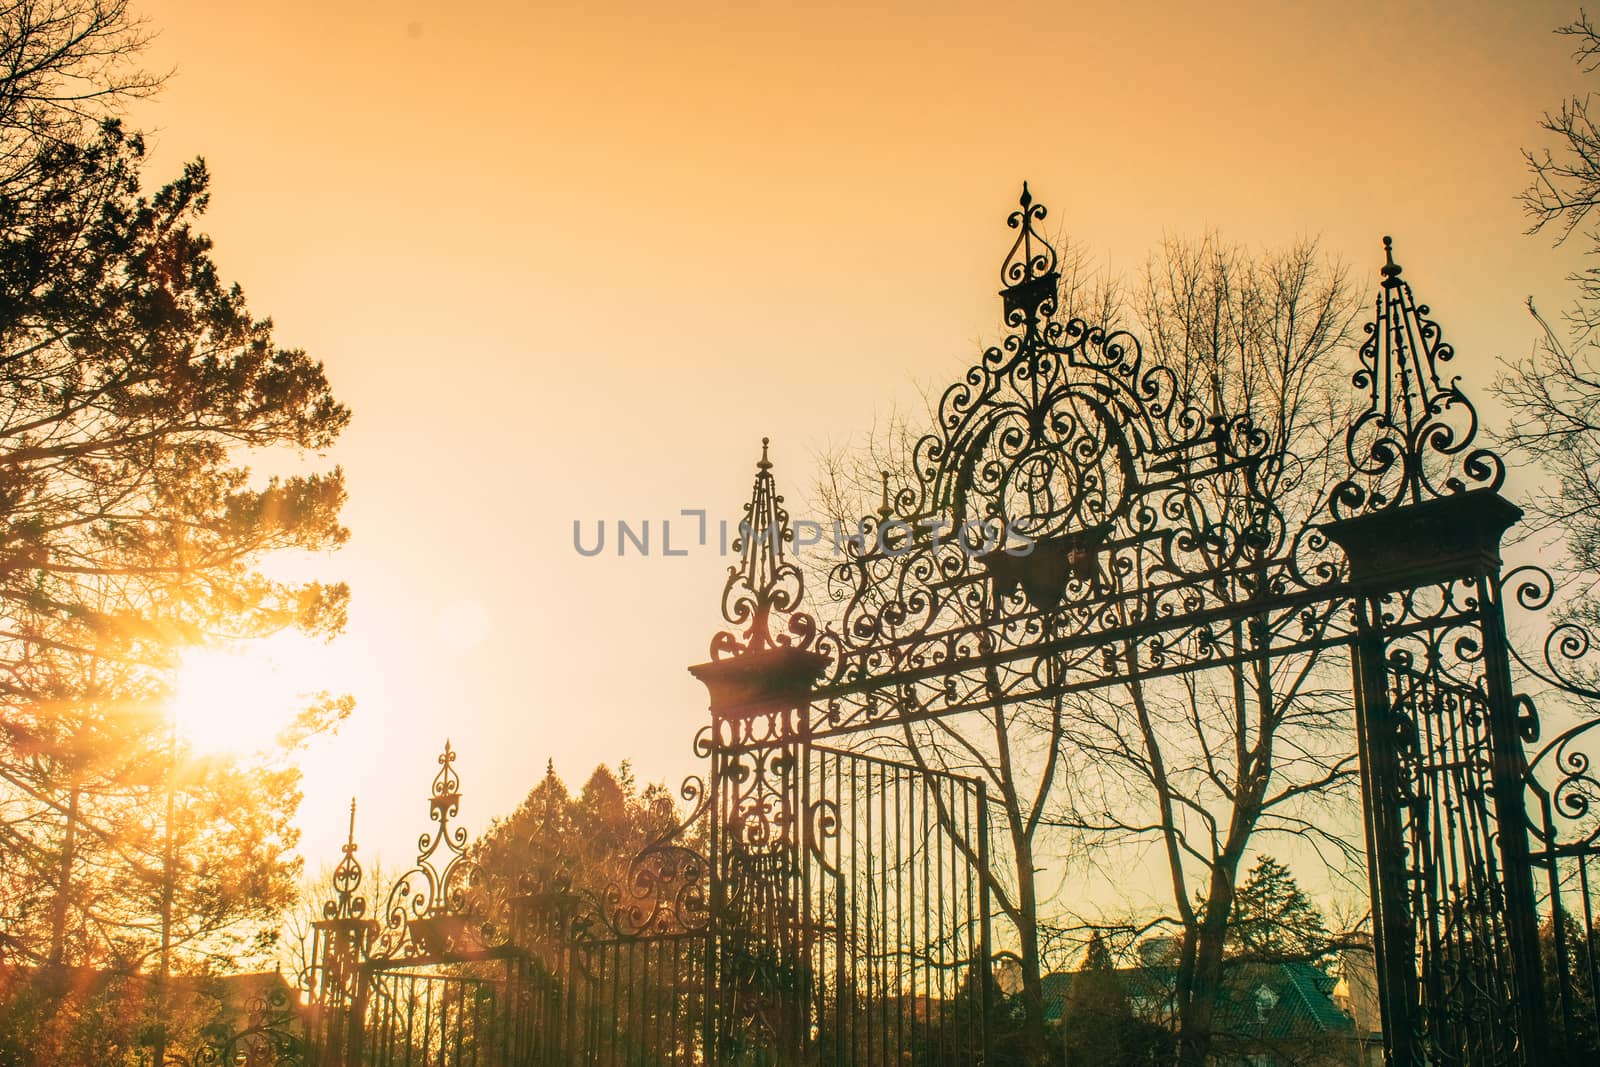 A Bright Yellow and Orange Sunset Behind an Ornamental Metal Gate